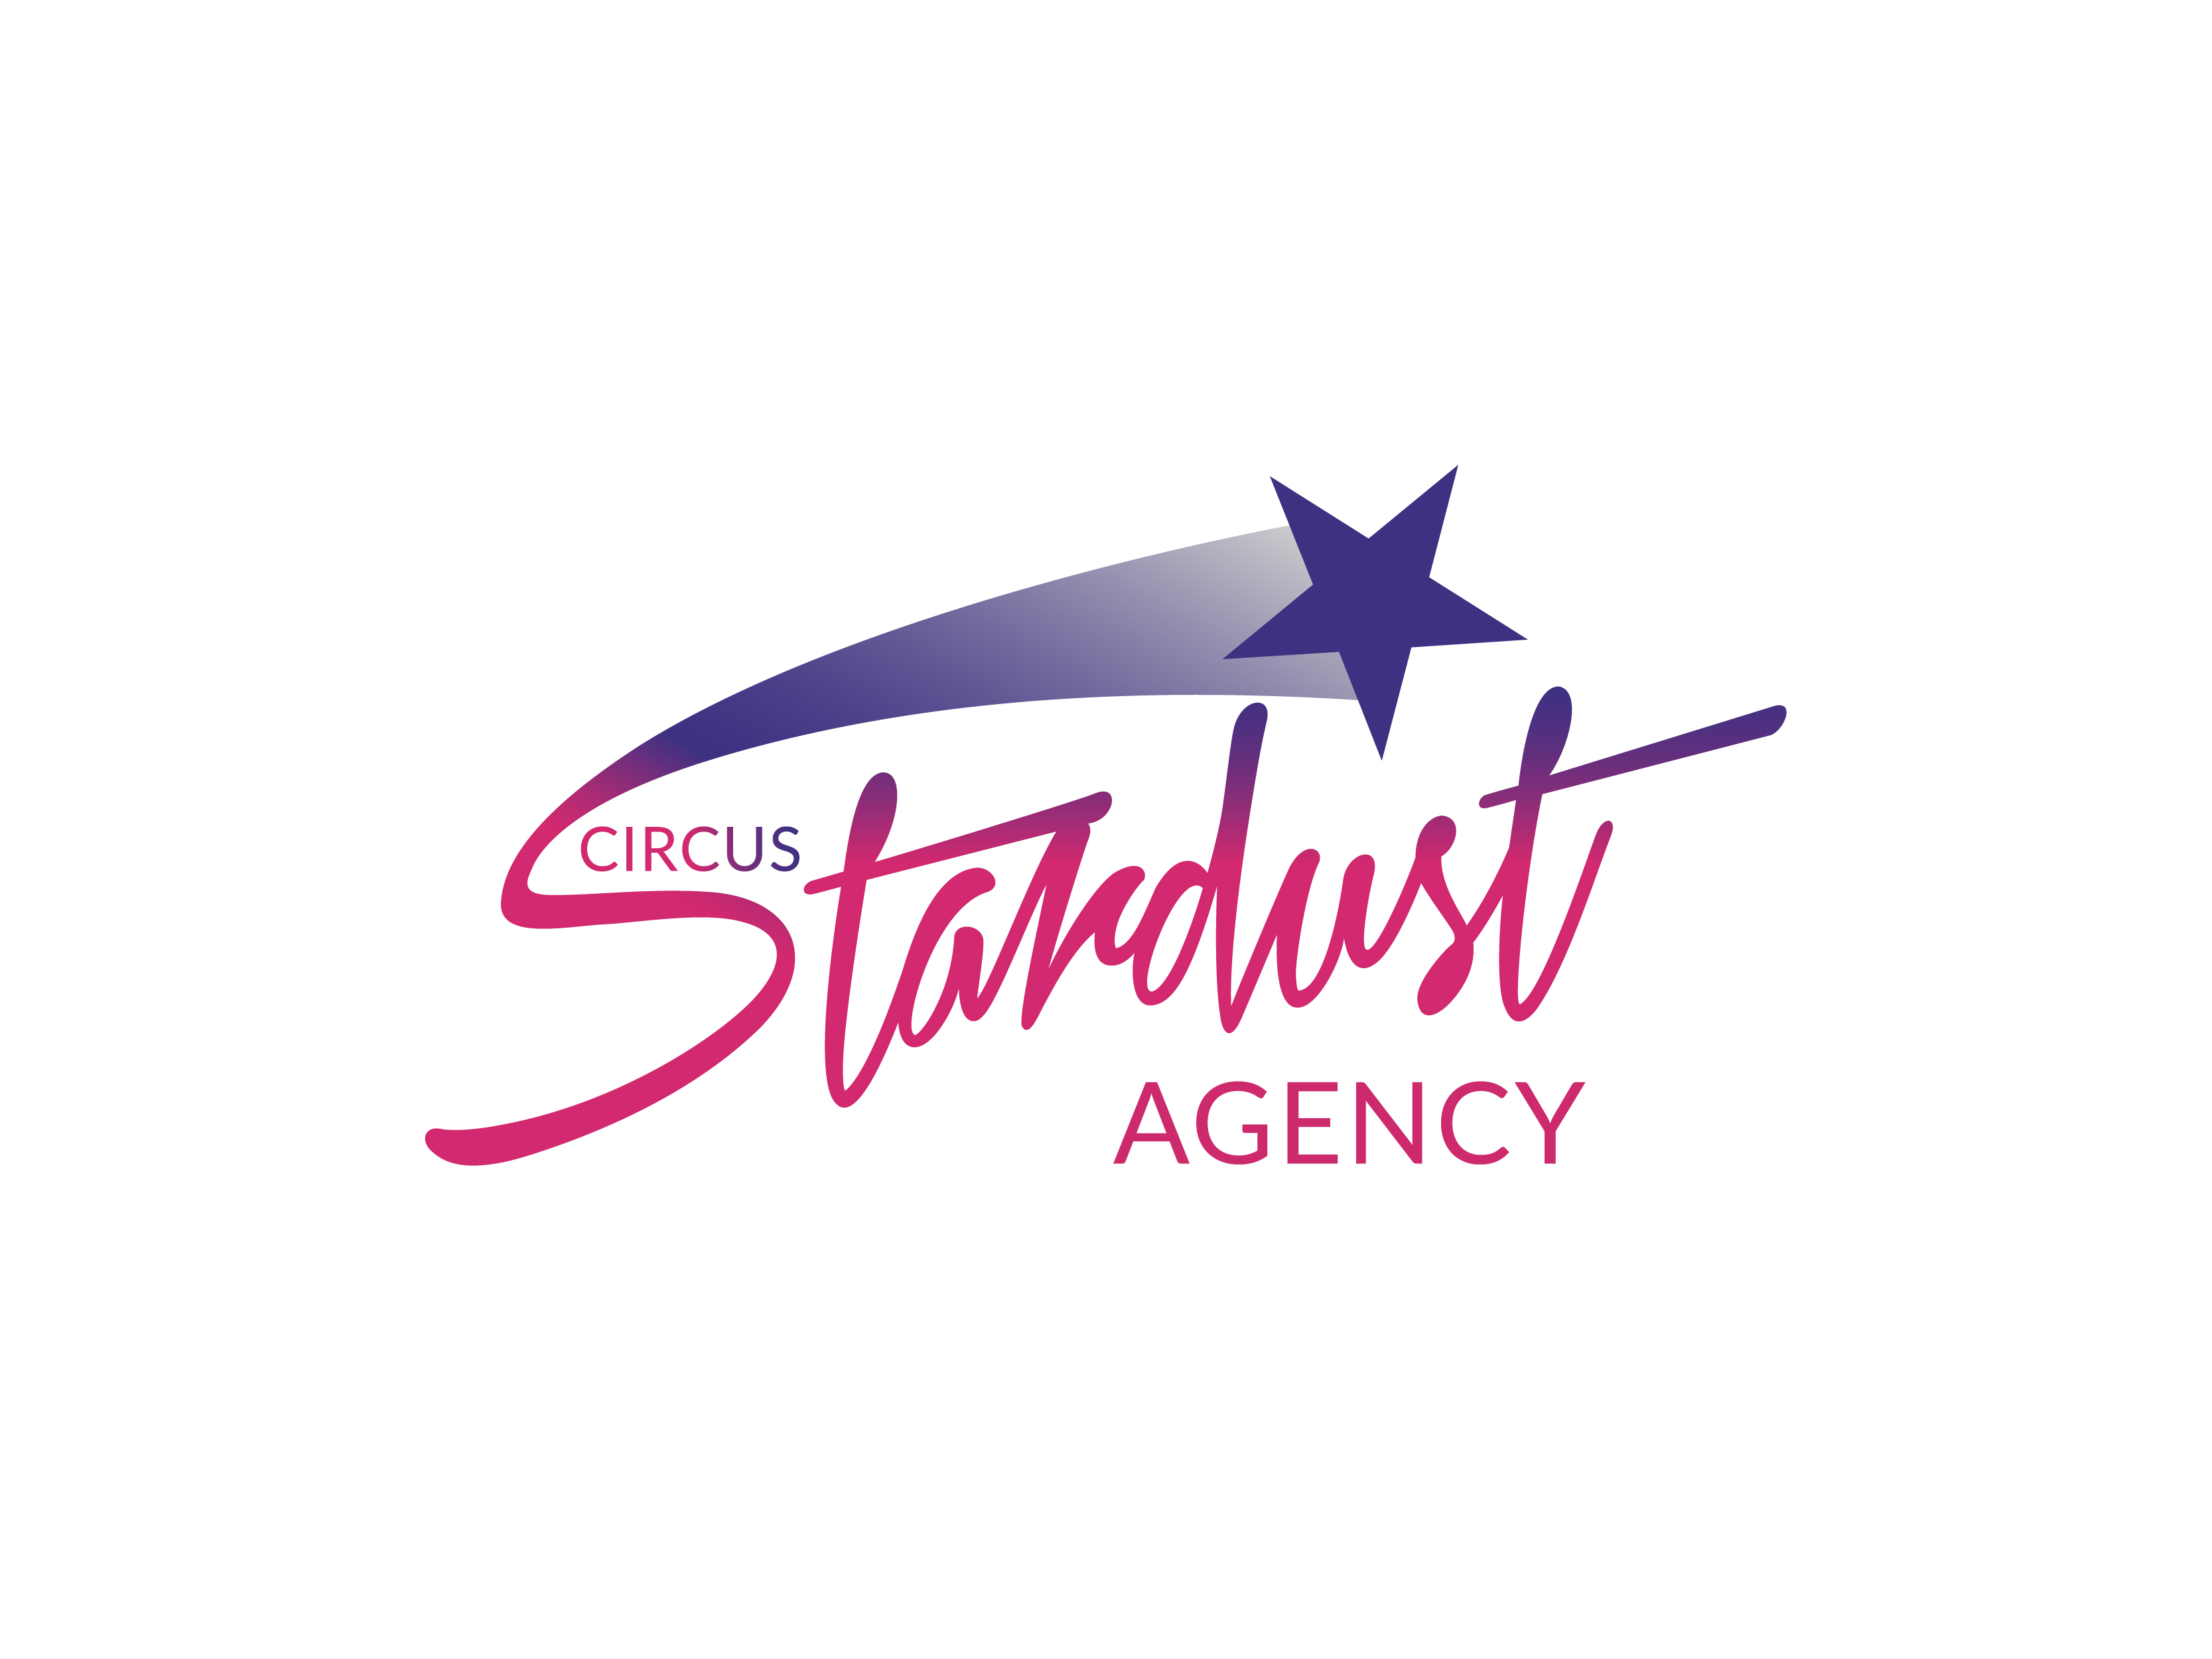 Logo of Circus Stardust Agency